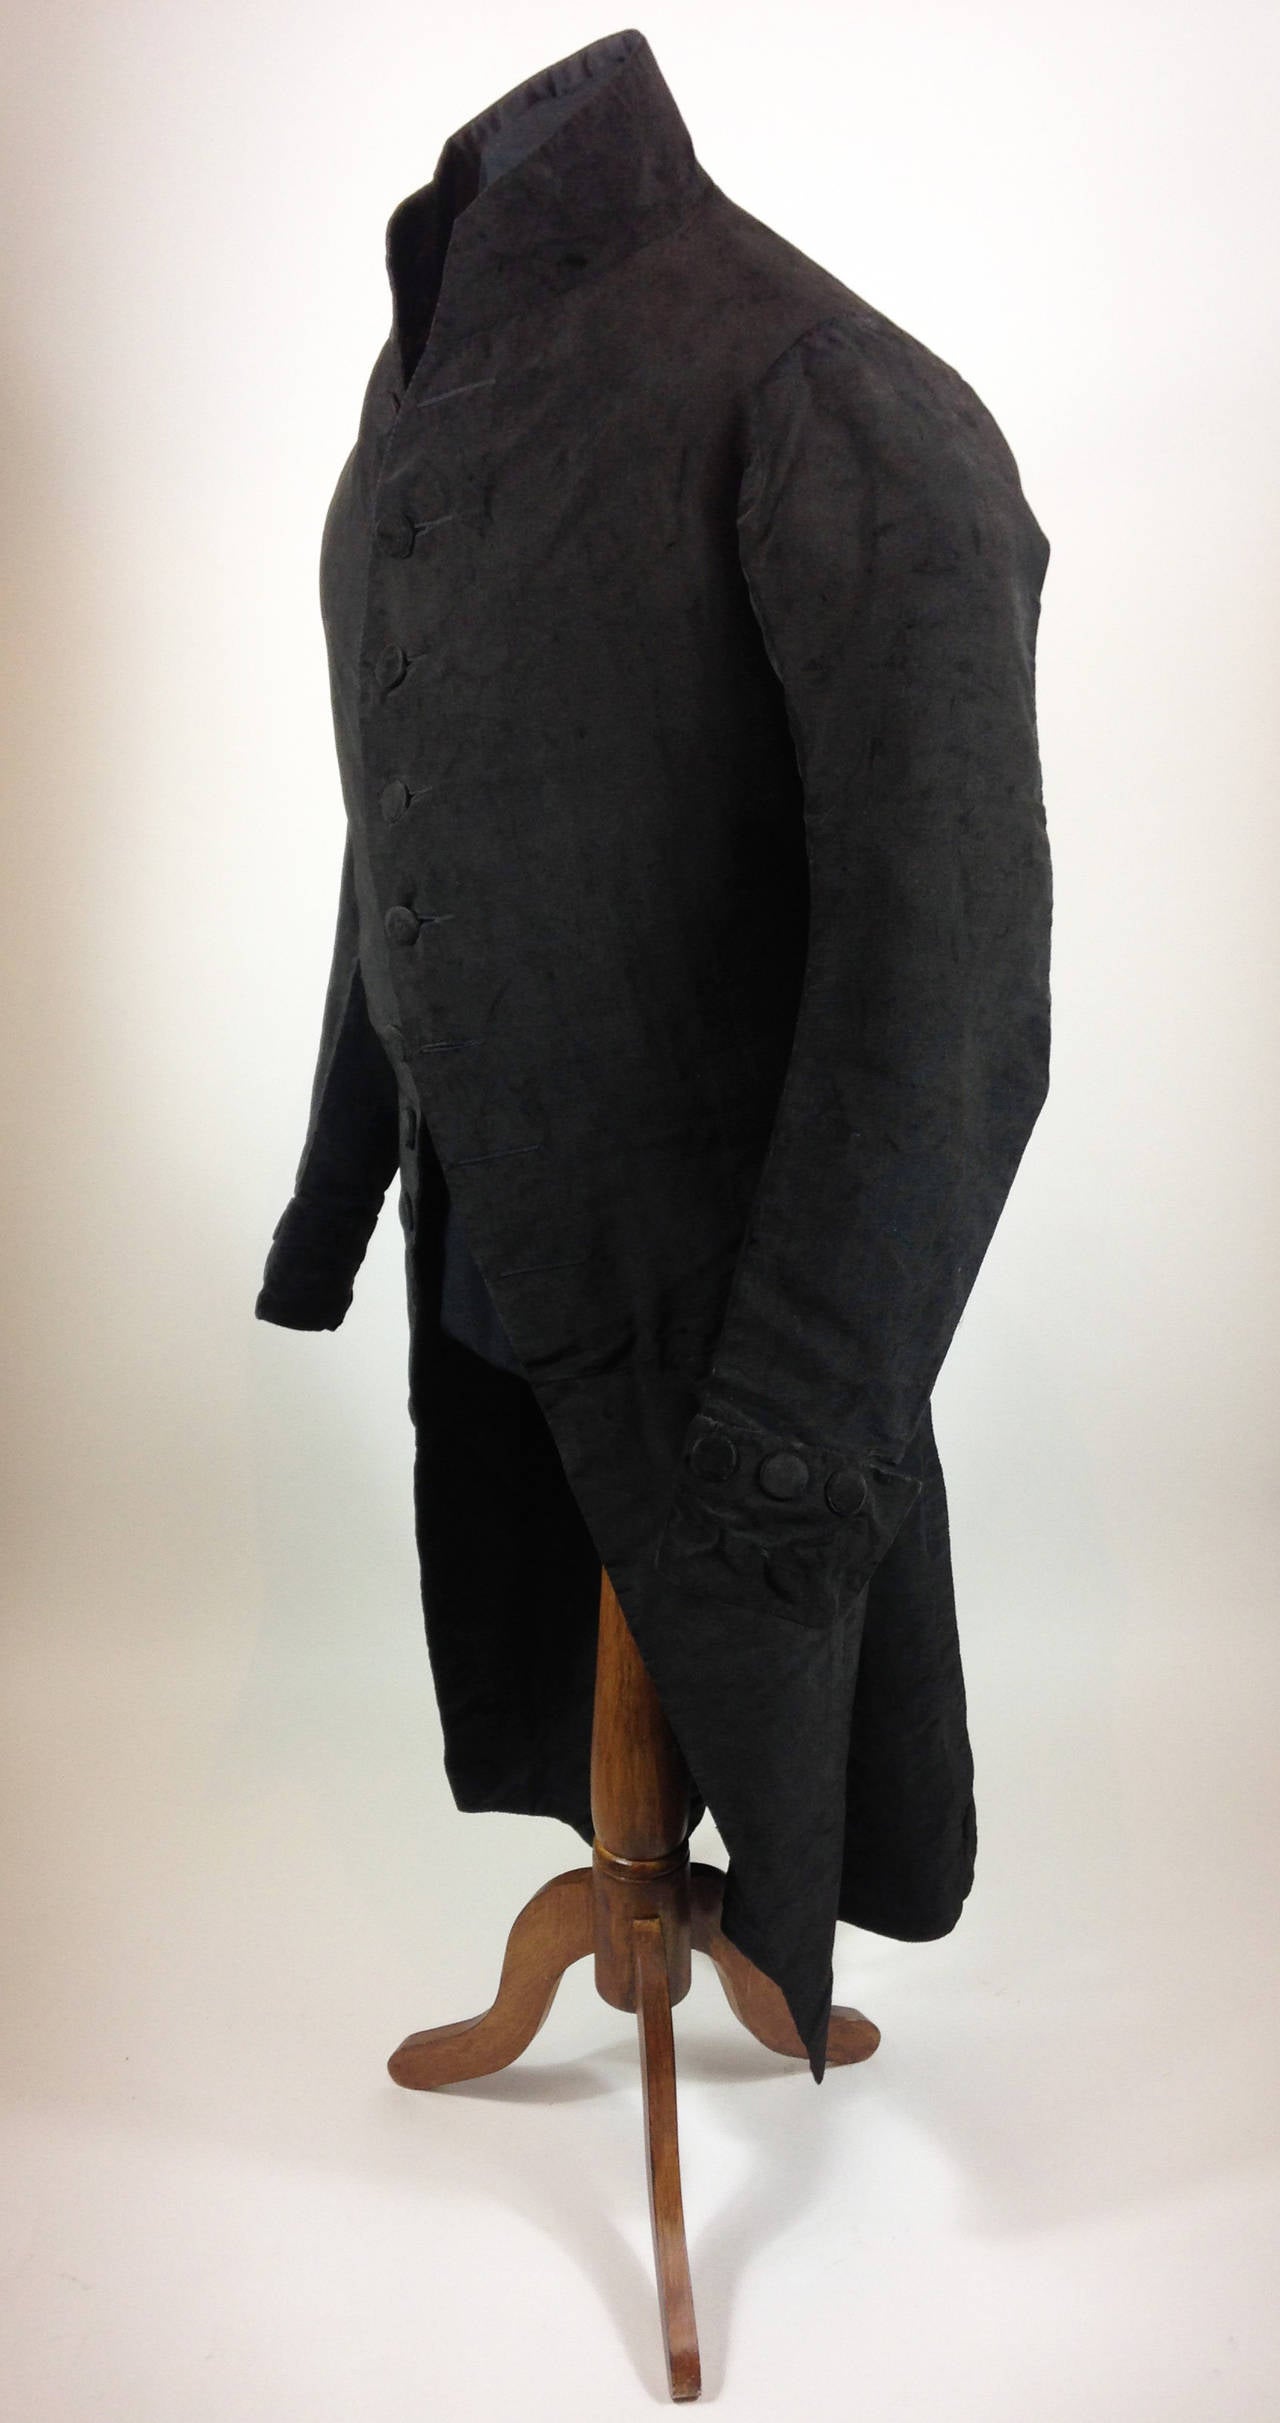 A very rare and unusually large example of a gentleman’s frock coat of bombazine circa 1790.

Wonderful condition for its age - there is some evidence of moth, however this does not detract. The material still has a wonderful shine and all buttons